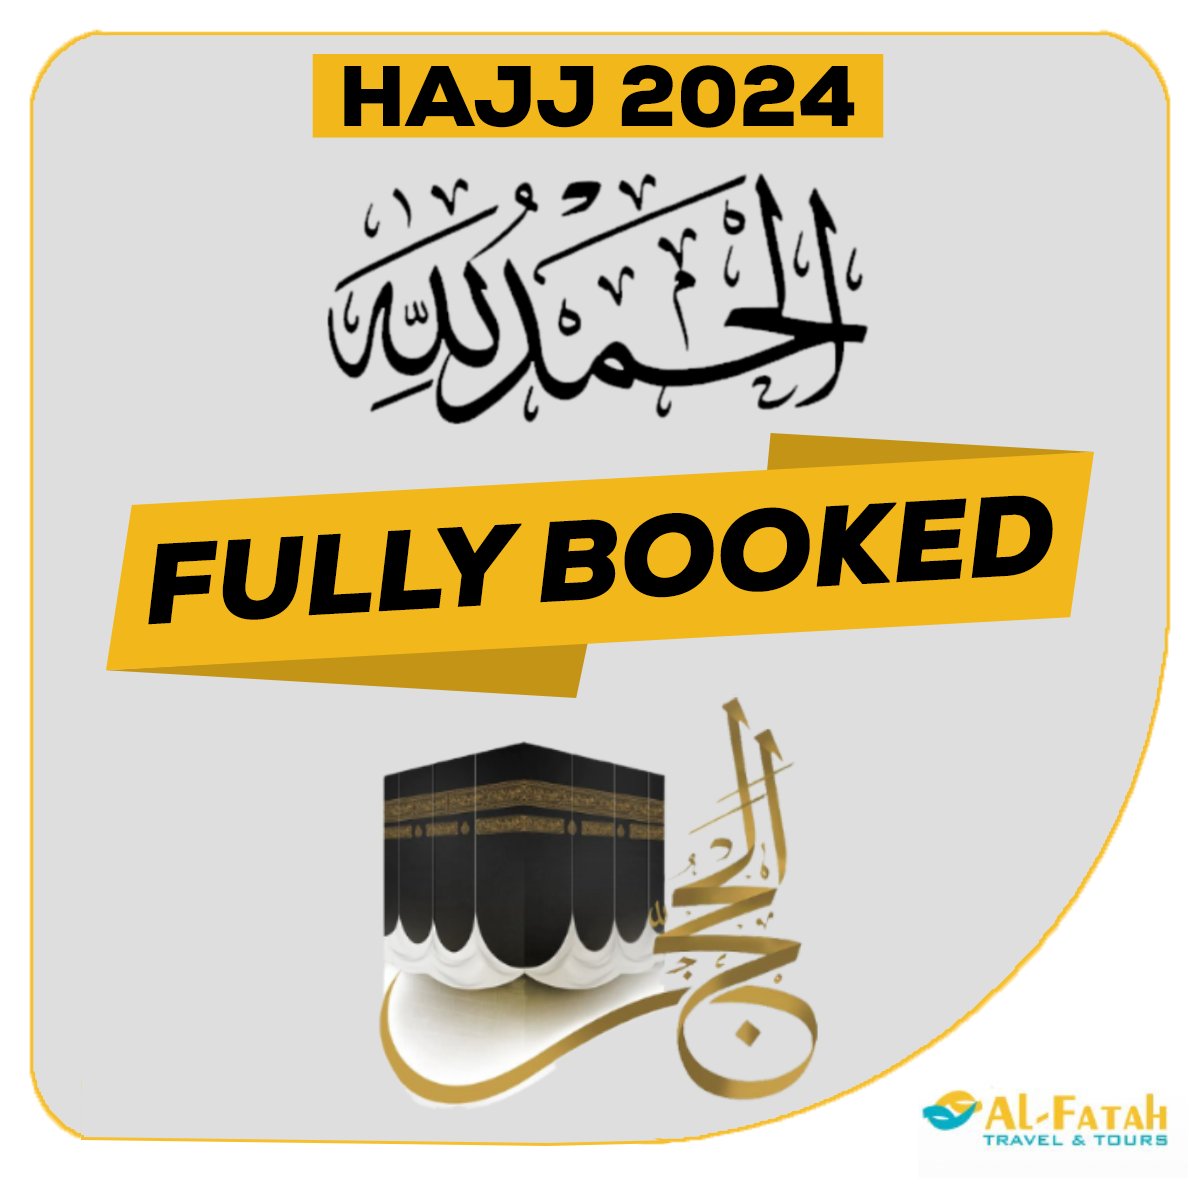 Another remarkable accomplishment by the Al-Fatah Travel team!

We're thrilled to announce that all slots for Hajj 2024 have been fully booked.

#AlFatah #Hajj2024 #AlFatahTravels #SacredJourney #divinejourney